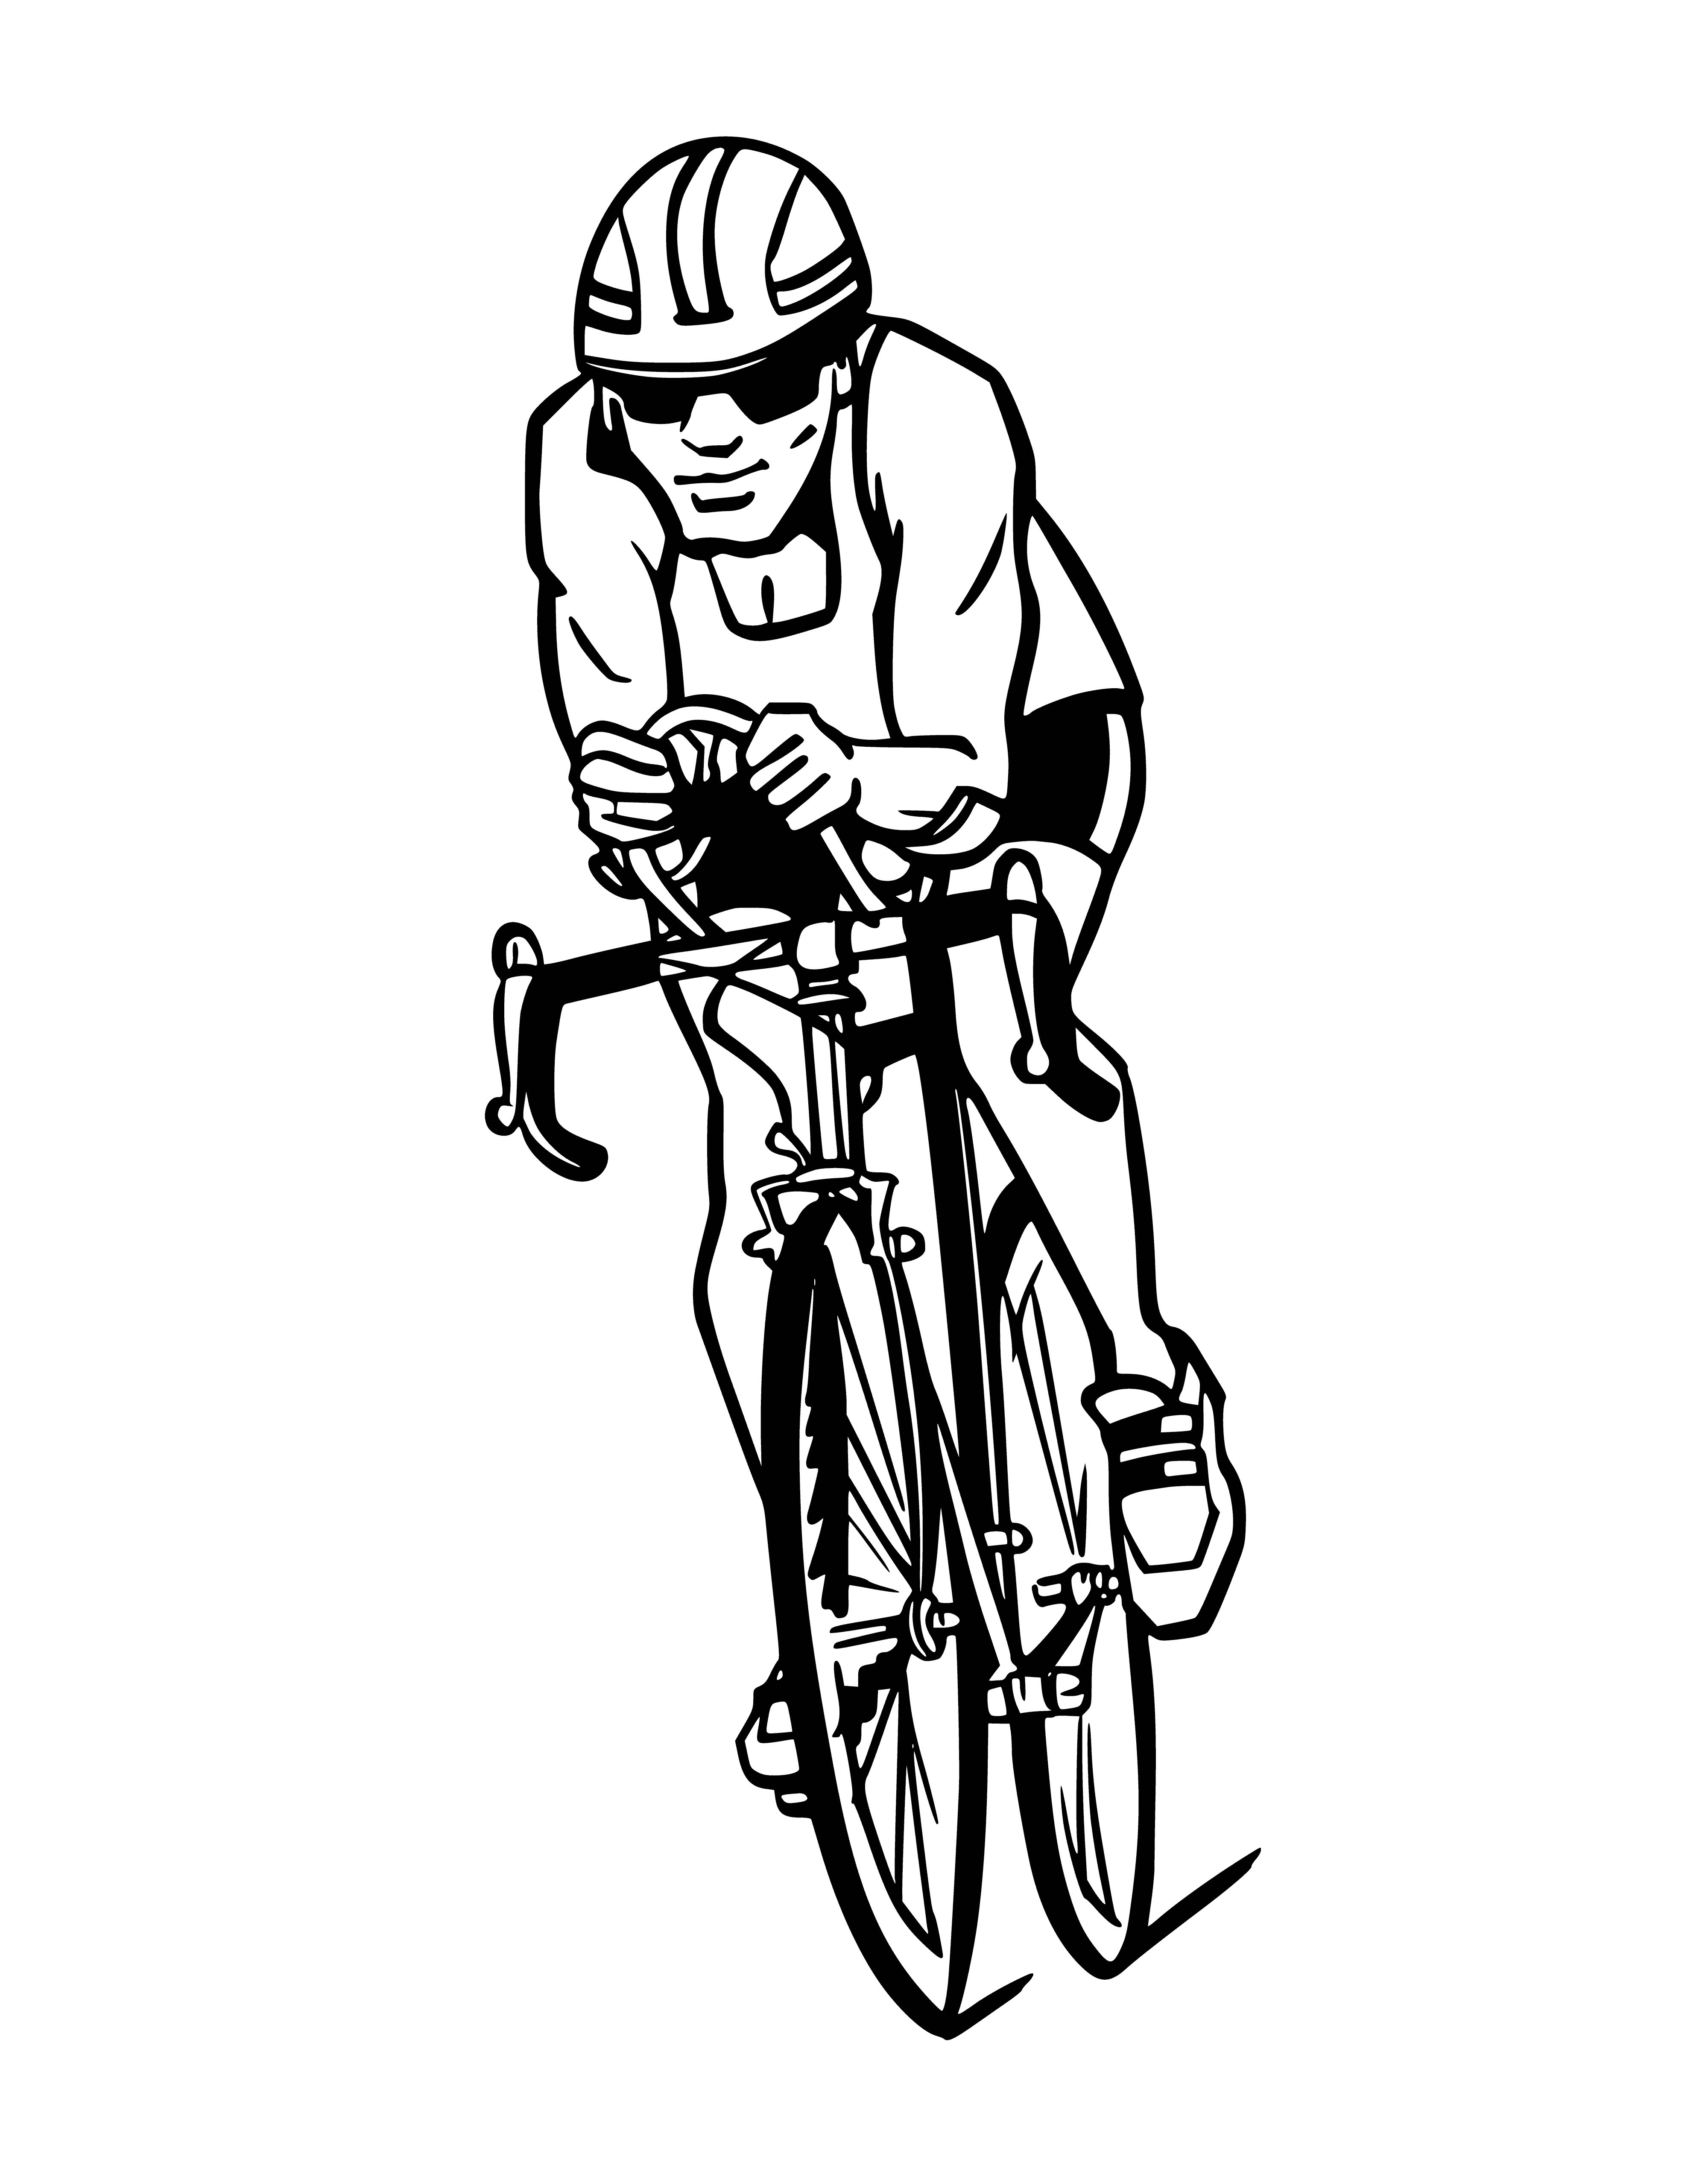 coloring page: Cyclist wearing helmet, gloves, and reflective vest rides bicycle with two thin tires on road.